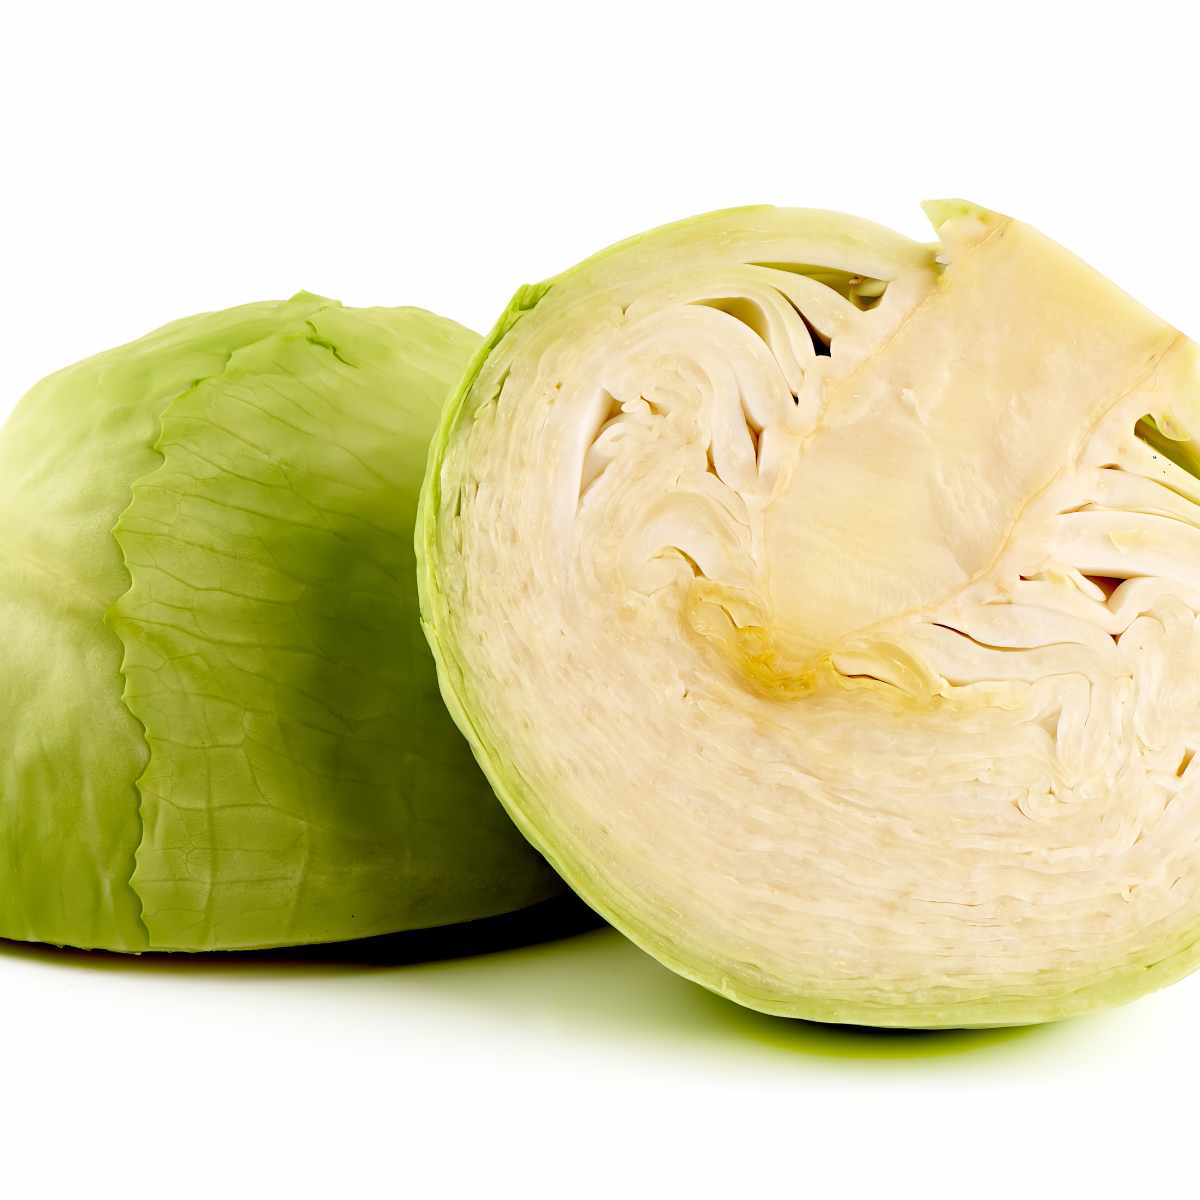 Green cabbage sliced open on a white background.